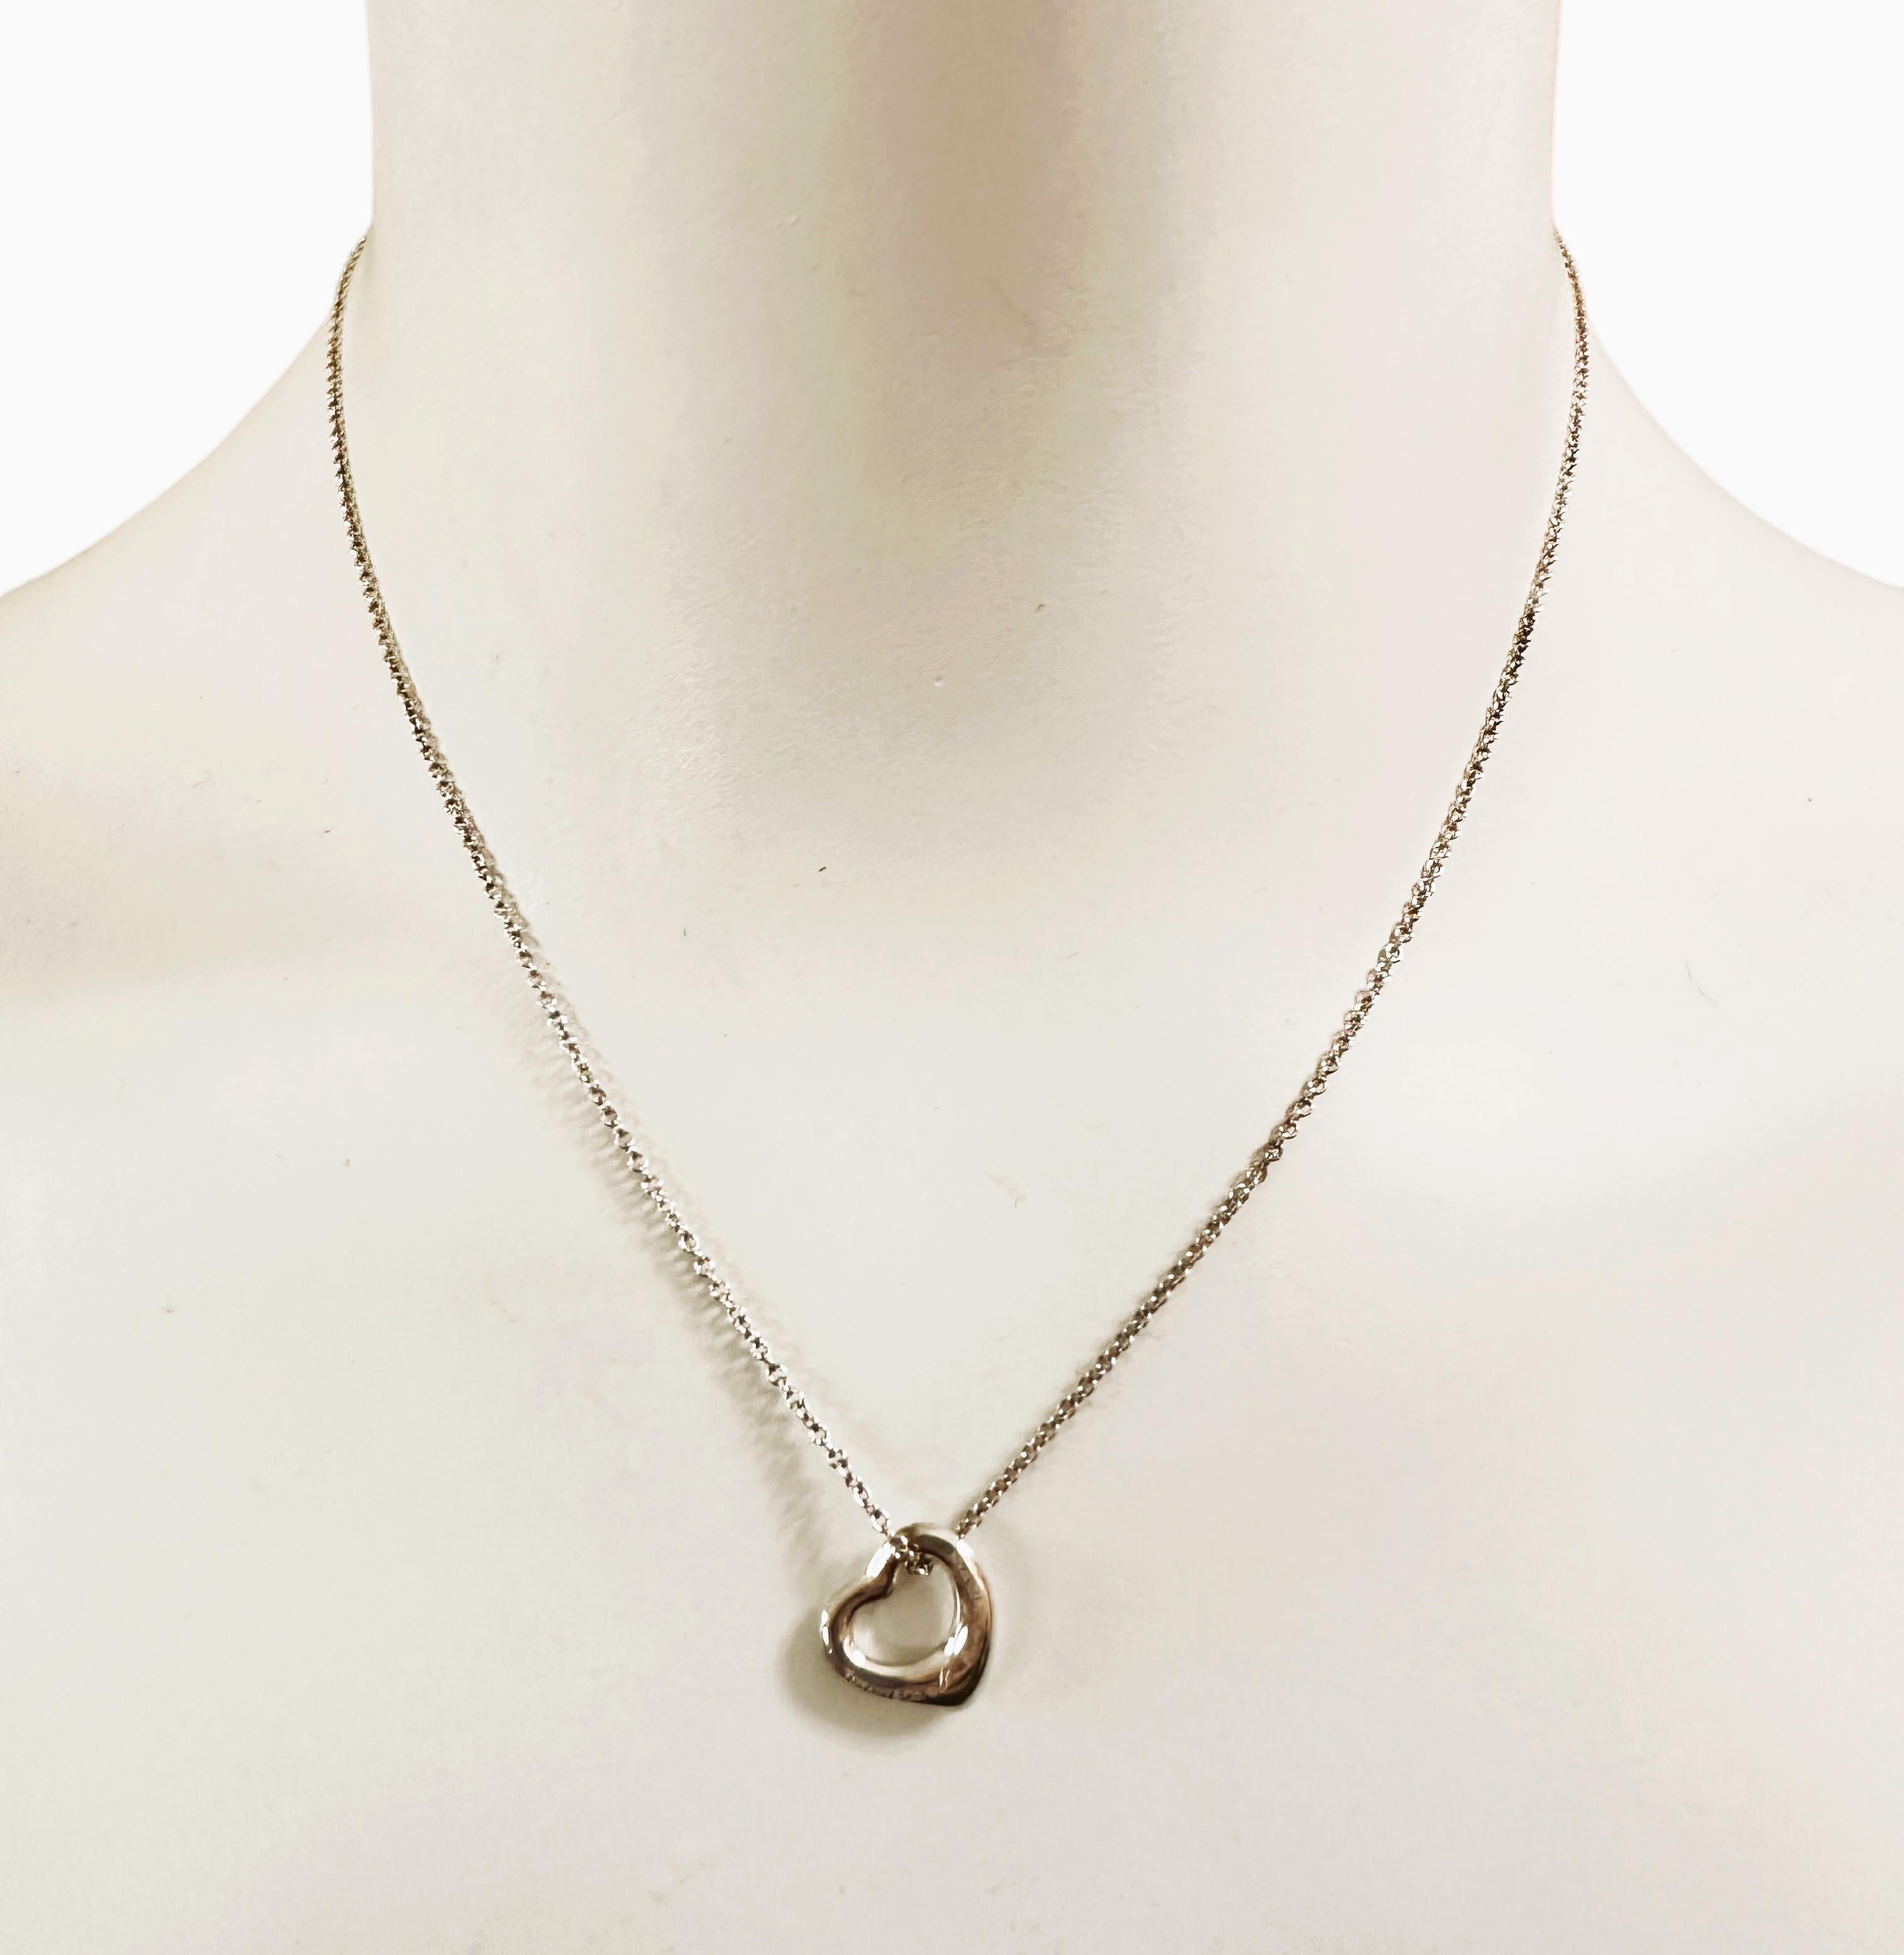 This is just a beautiful Tiffany necklace.  The sterling silver just glows on it.  It is pre-owned and in excellent condition.  At the clasp the necklace is stamped 